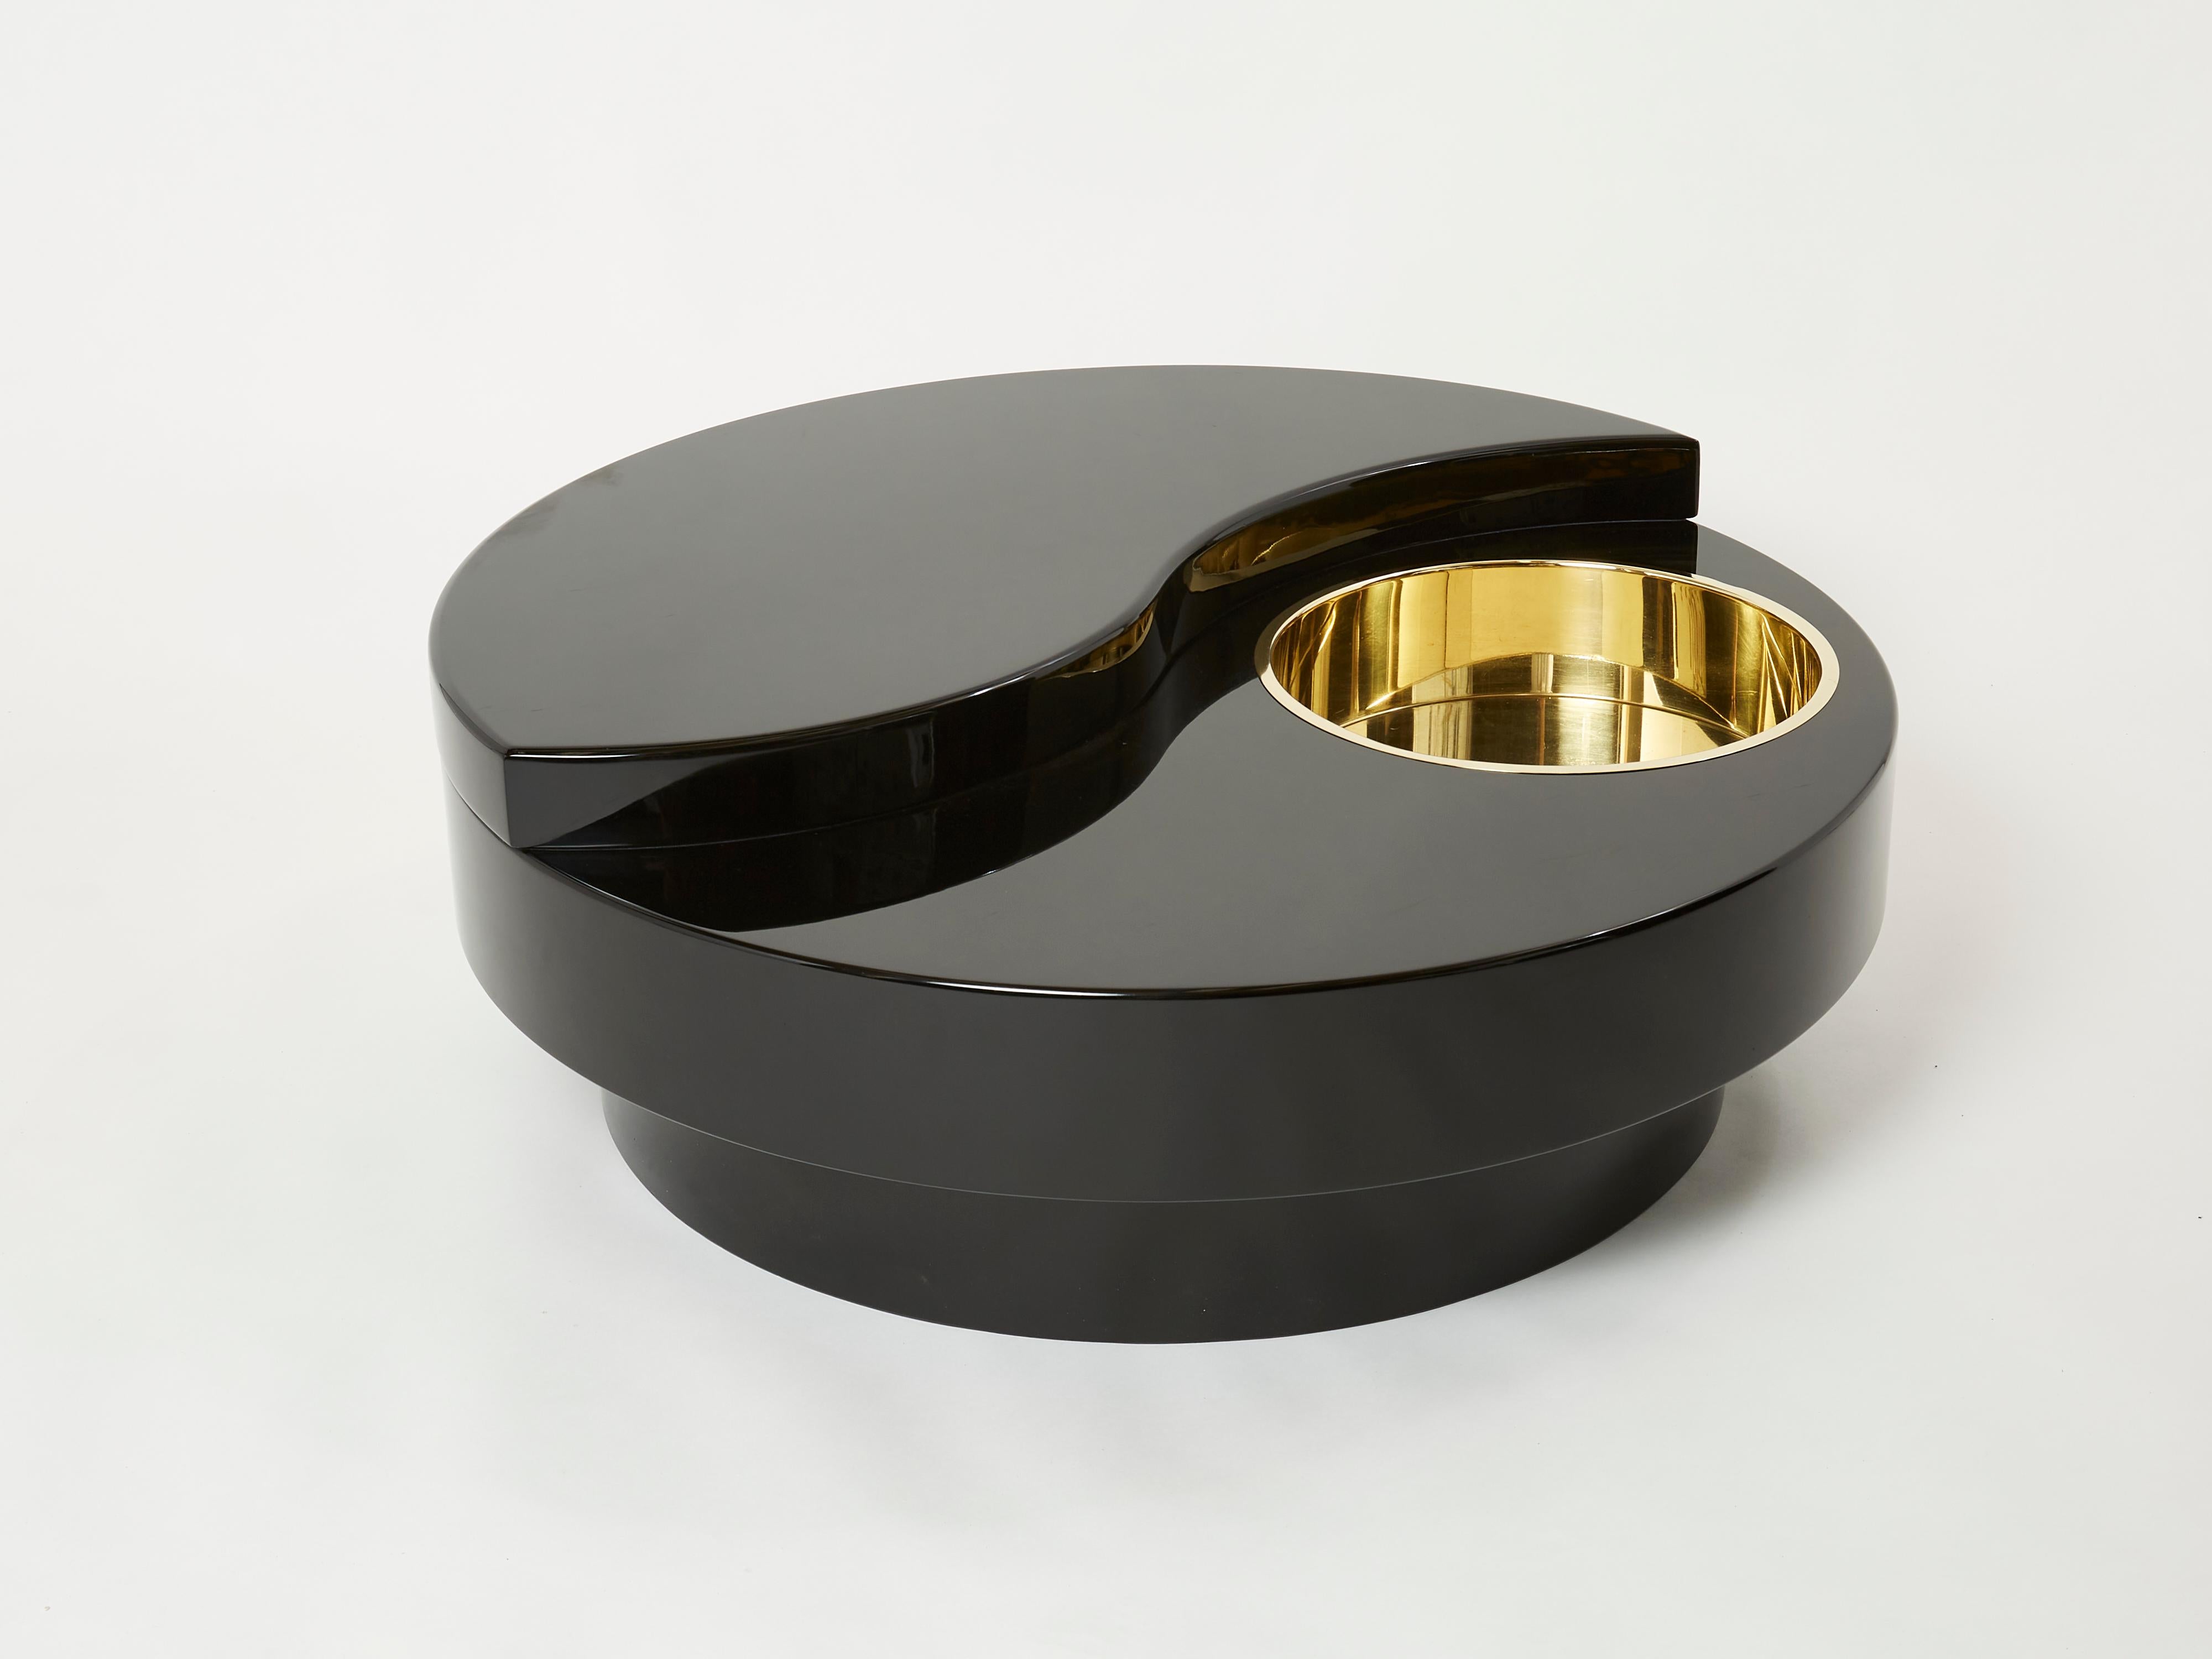 This stunning TRG Yin Yang coffee table is guaranteed to be the focus of attention when you entertain guests in your living room. Following the glamorous mid-century look of other classic Willy Rizzo designs, the crisp black lacquered table is inset